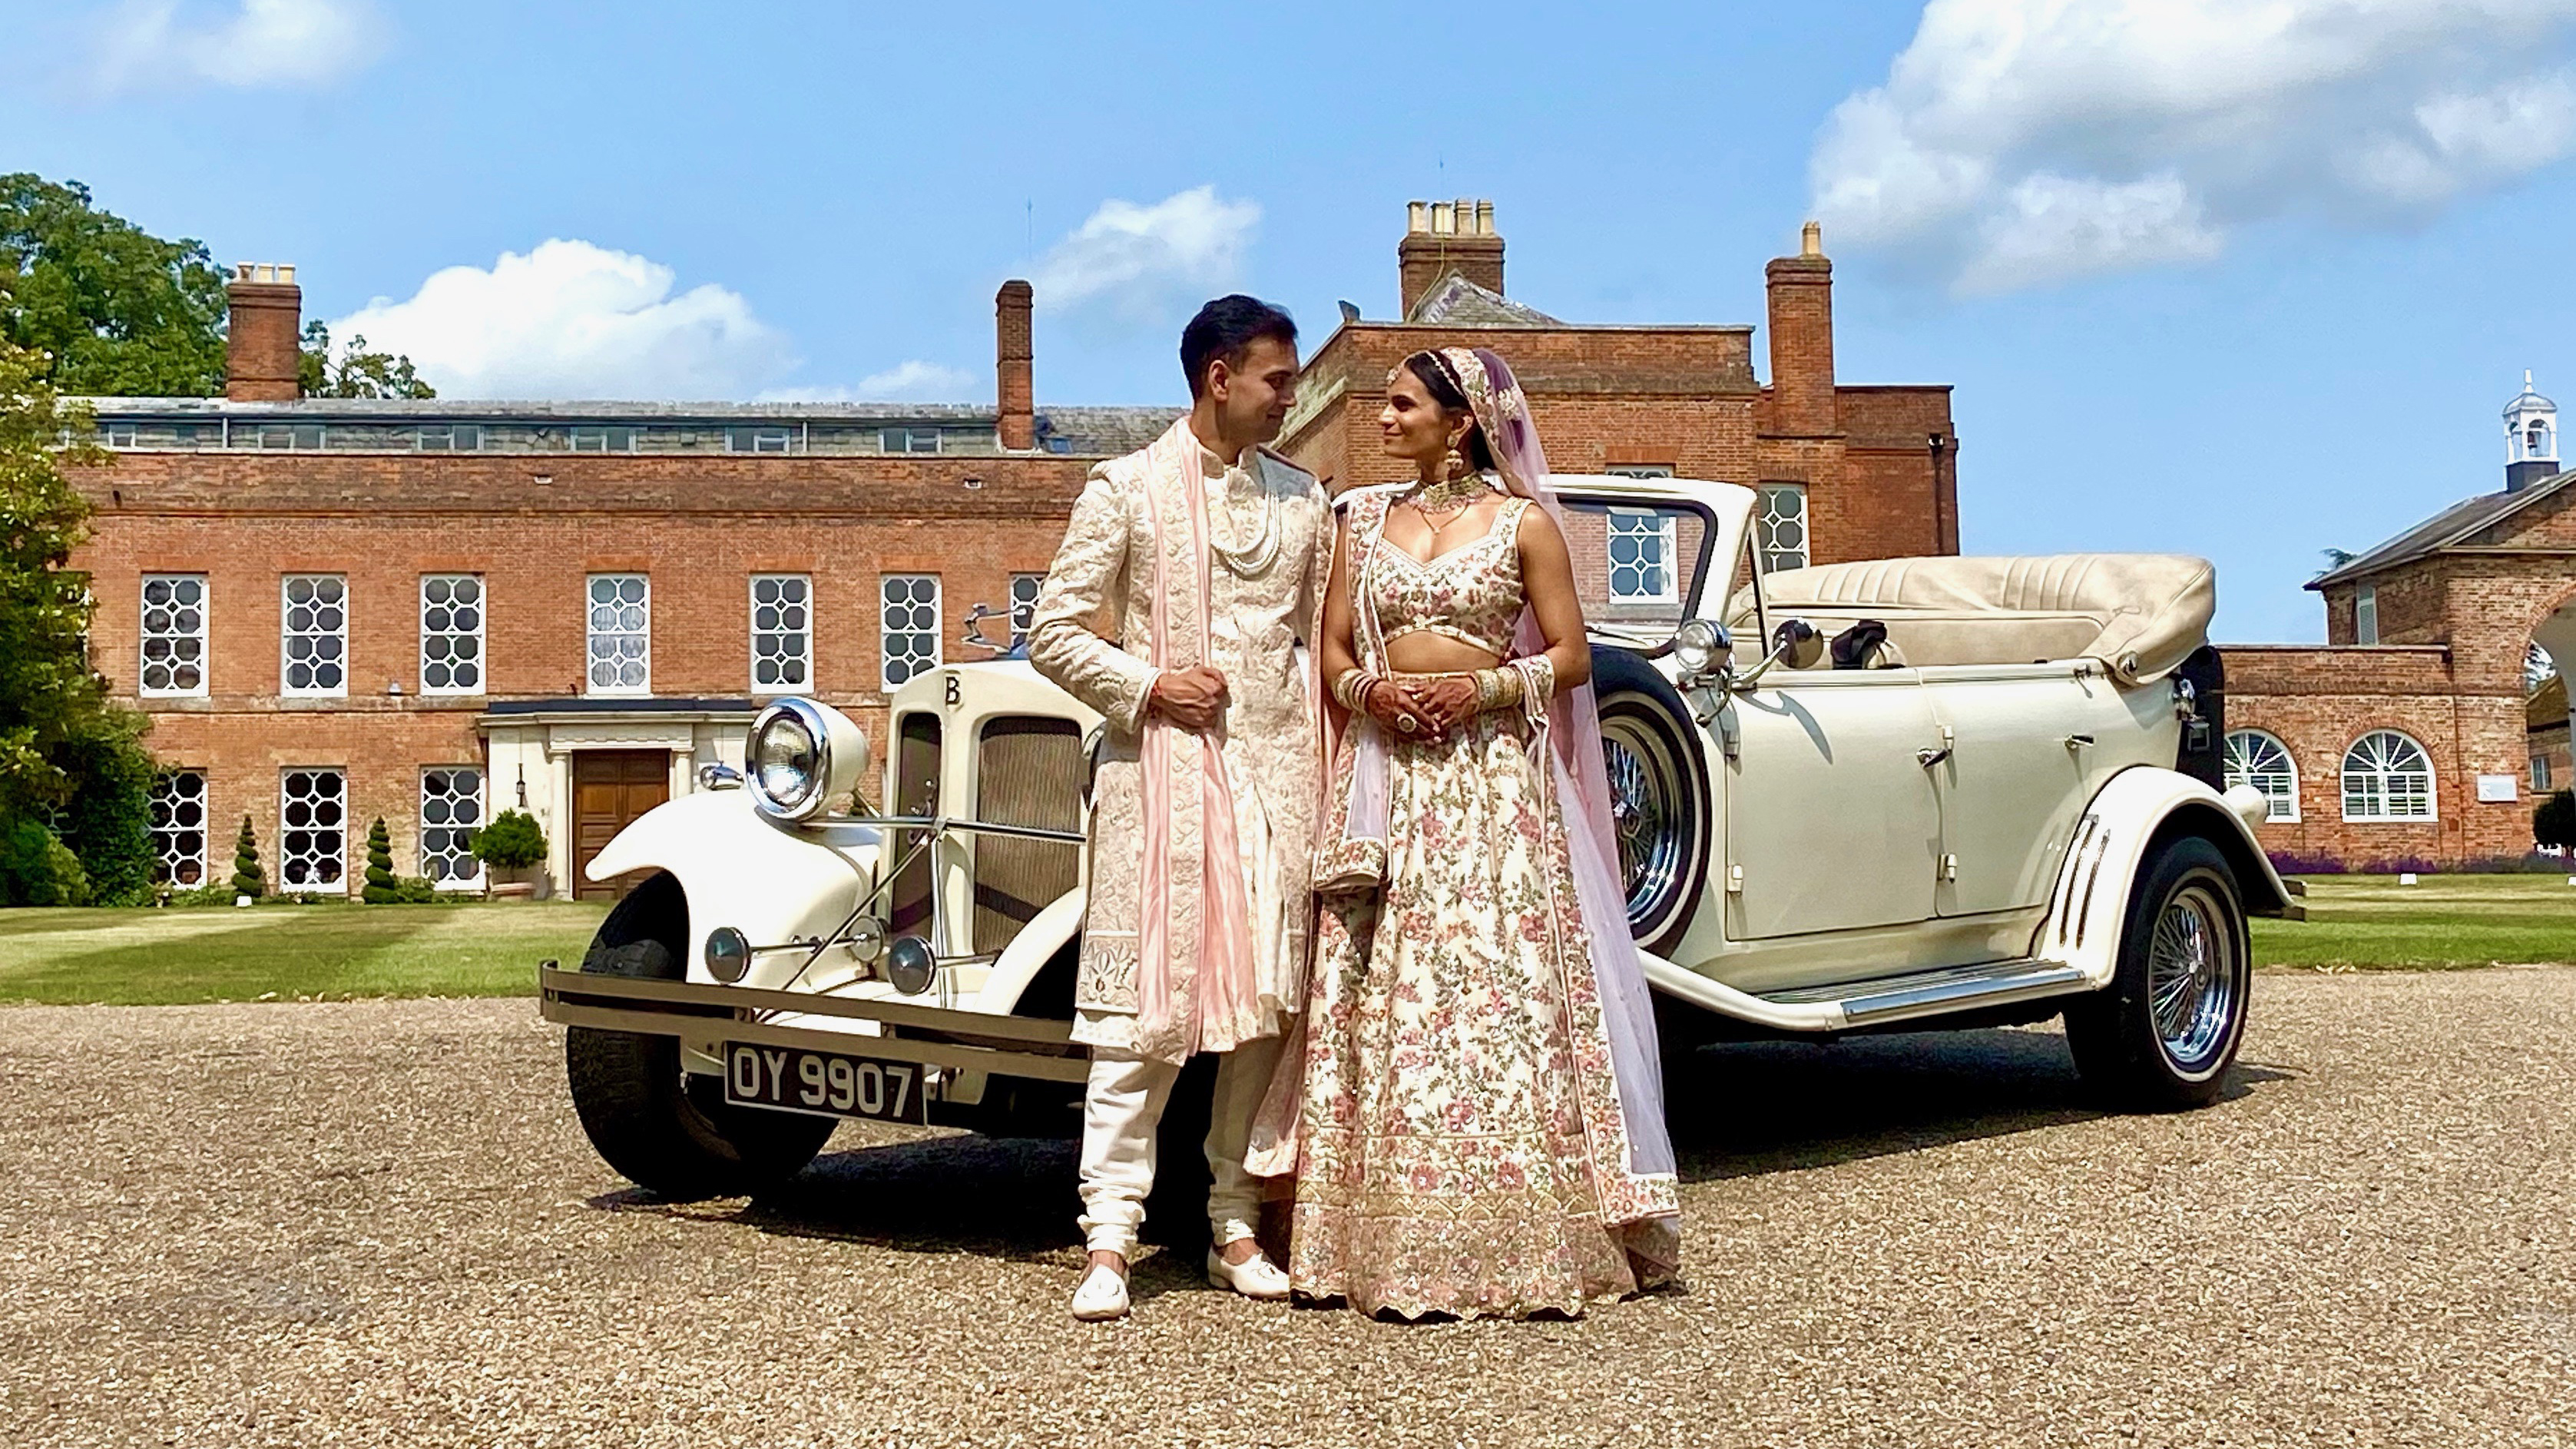 Convertible vintage style Beauford with roof down with newly wed Asian couple standing in front of the vehicle looking at each others. Vehicle is parked in front of a large manor house in Enfield